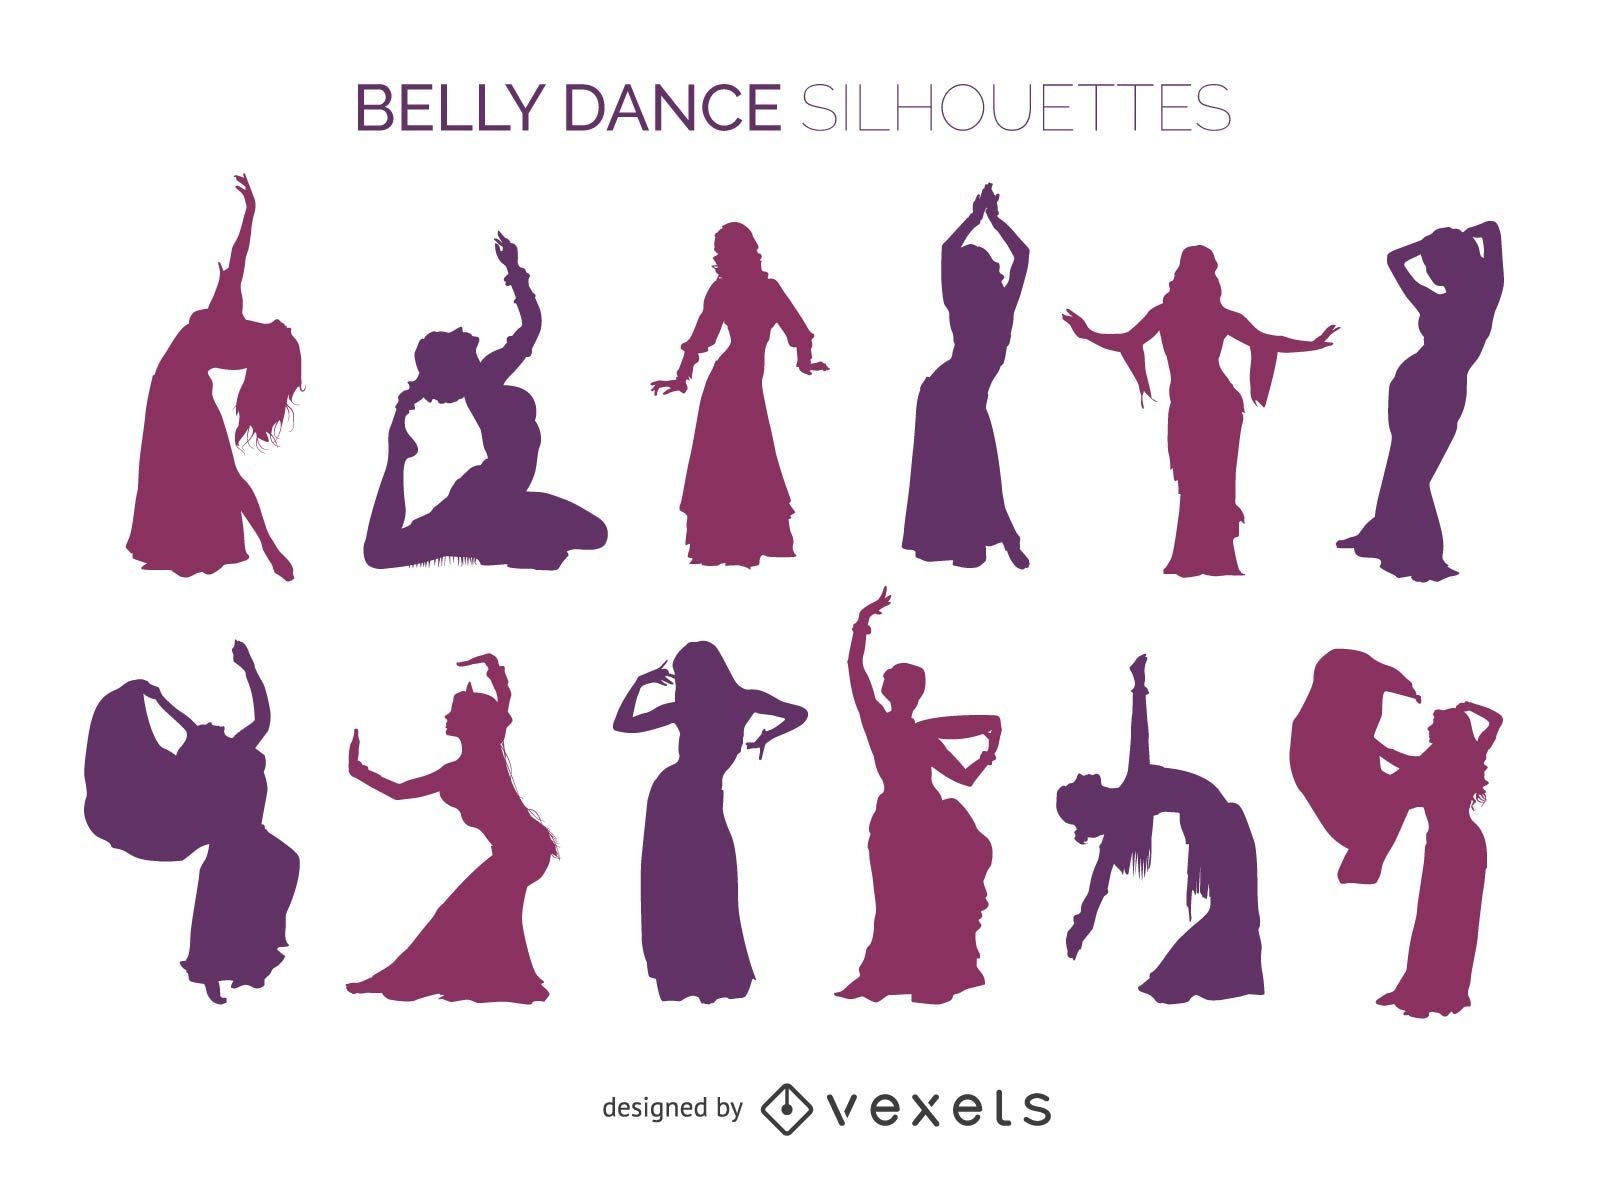 Belly dancer silhouettes Vector download